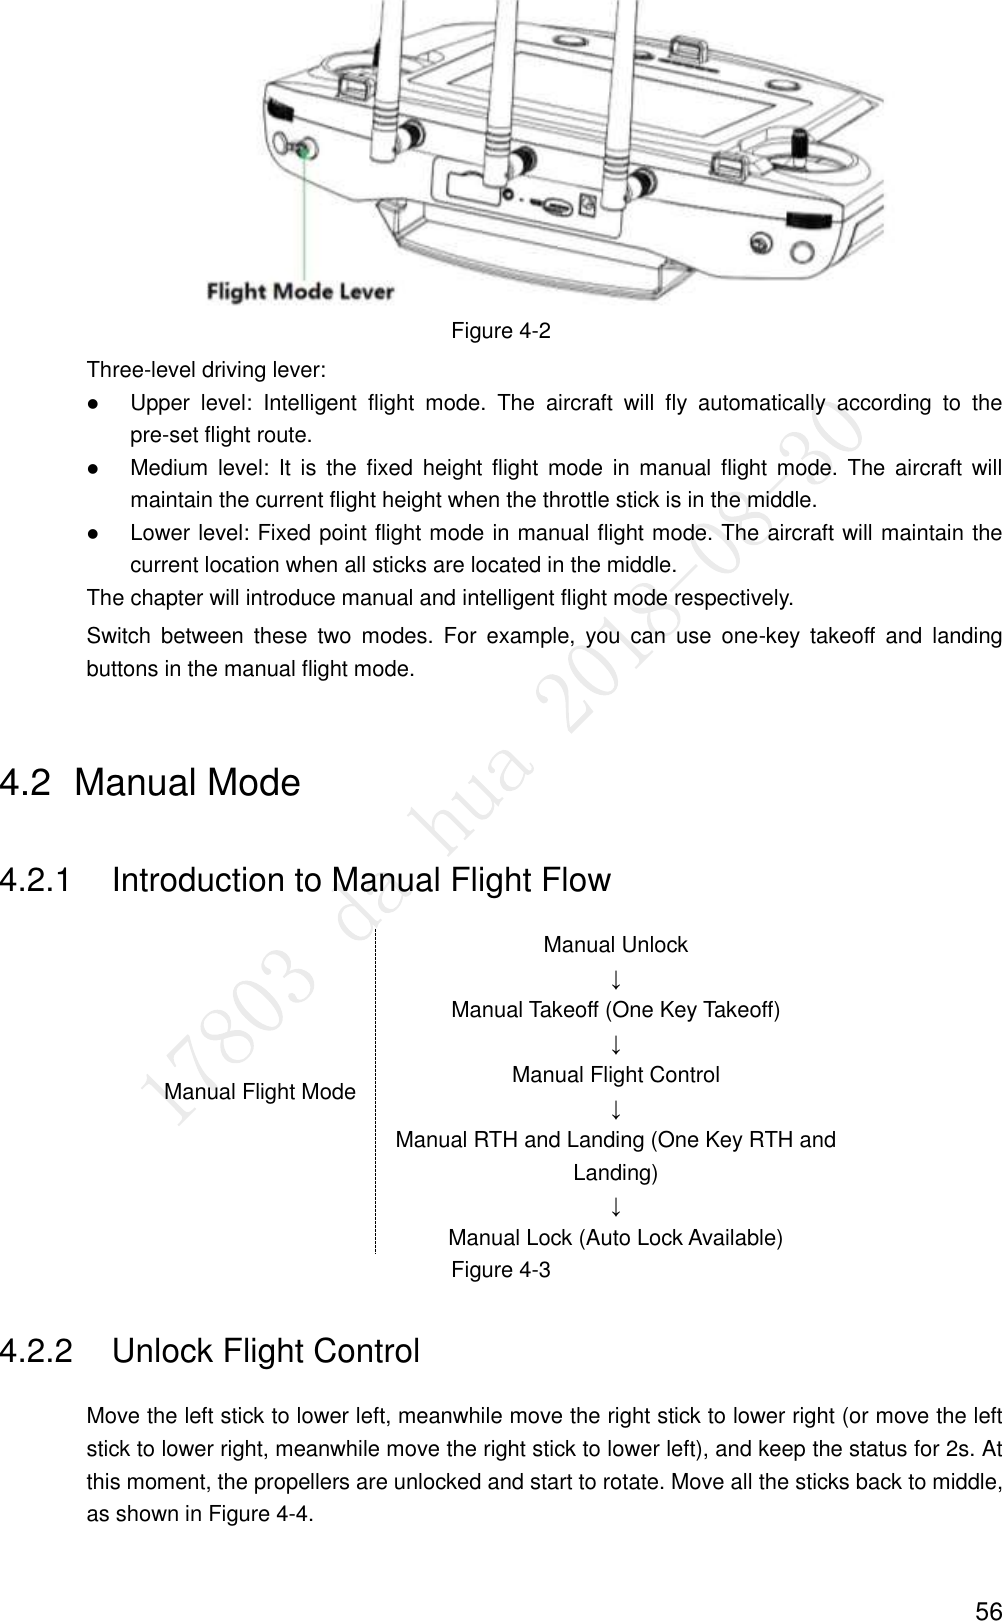  56  Figure 4-2 Three-level driving lever:  Upper  level:  Intelligent  flight  mode.  The  aircraft  will  fly  automatically  according  to  the pre-set flight route.  Medium level:  It  is  the  fixed  height  flight  mode  in  manual  flight mode.  The  aircraft  will maintain the current flight height when the throttle stick is in the middle.  Lower level: Fixed point flight mode in manual flight mode. The aircraft will maintain the current location when all sticks are located in the middle. The chapter will introduce manual and intelligent flight mode respectively. Switch  between  these  two  modes.  For  example,  you  can  use  one-key  takeoff  and  landing buttons in the manual flight mode. 4.2  Manual Mode 4.2.1  Introduction to Manual Flight Flow Manual Flight Mode Manual Unlock ↓ Manual Takeoff (One Key Takeoff) ↓ Manual Flight Control ↓ Manual RTH and Landing (One Key RTH and Landing) ↓ Manual Lock (Auto Lock Available) Figure 4-3 4.2.2  Unlock Flight Control Move the left stick to lower left, meanwhile move the right stick to lower right (or move the left stick to lower right, meanwhile move the right stick to lower left), and keep the status for 2s. At this moment, the propellers are unlocked and start to rotate. Move all the sticks back to middle, as shown in Figure 4-4. 